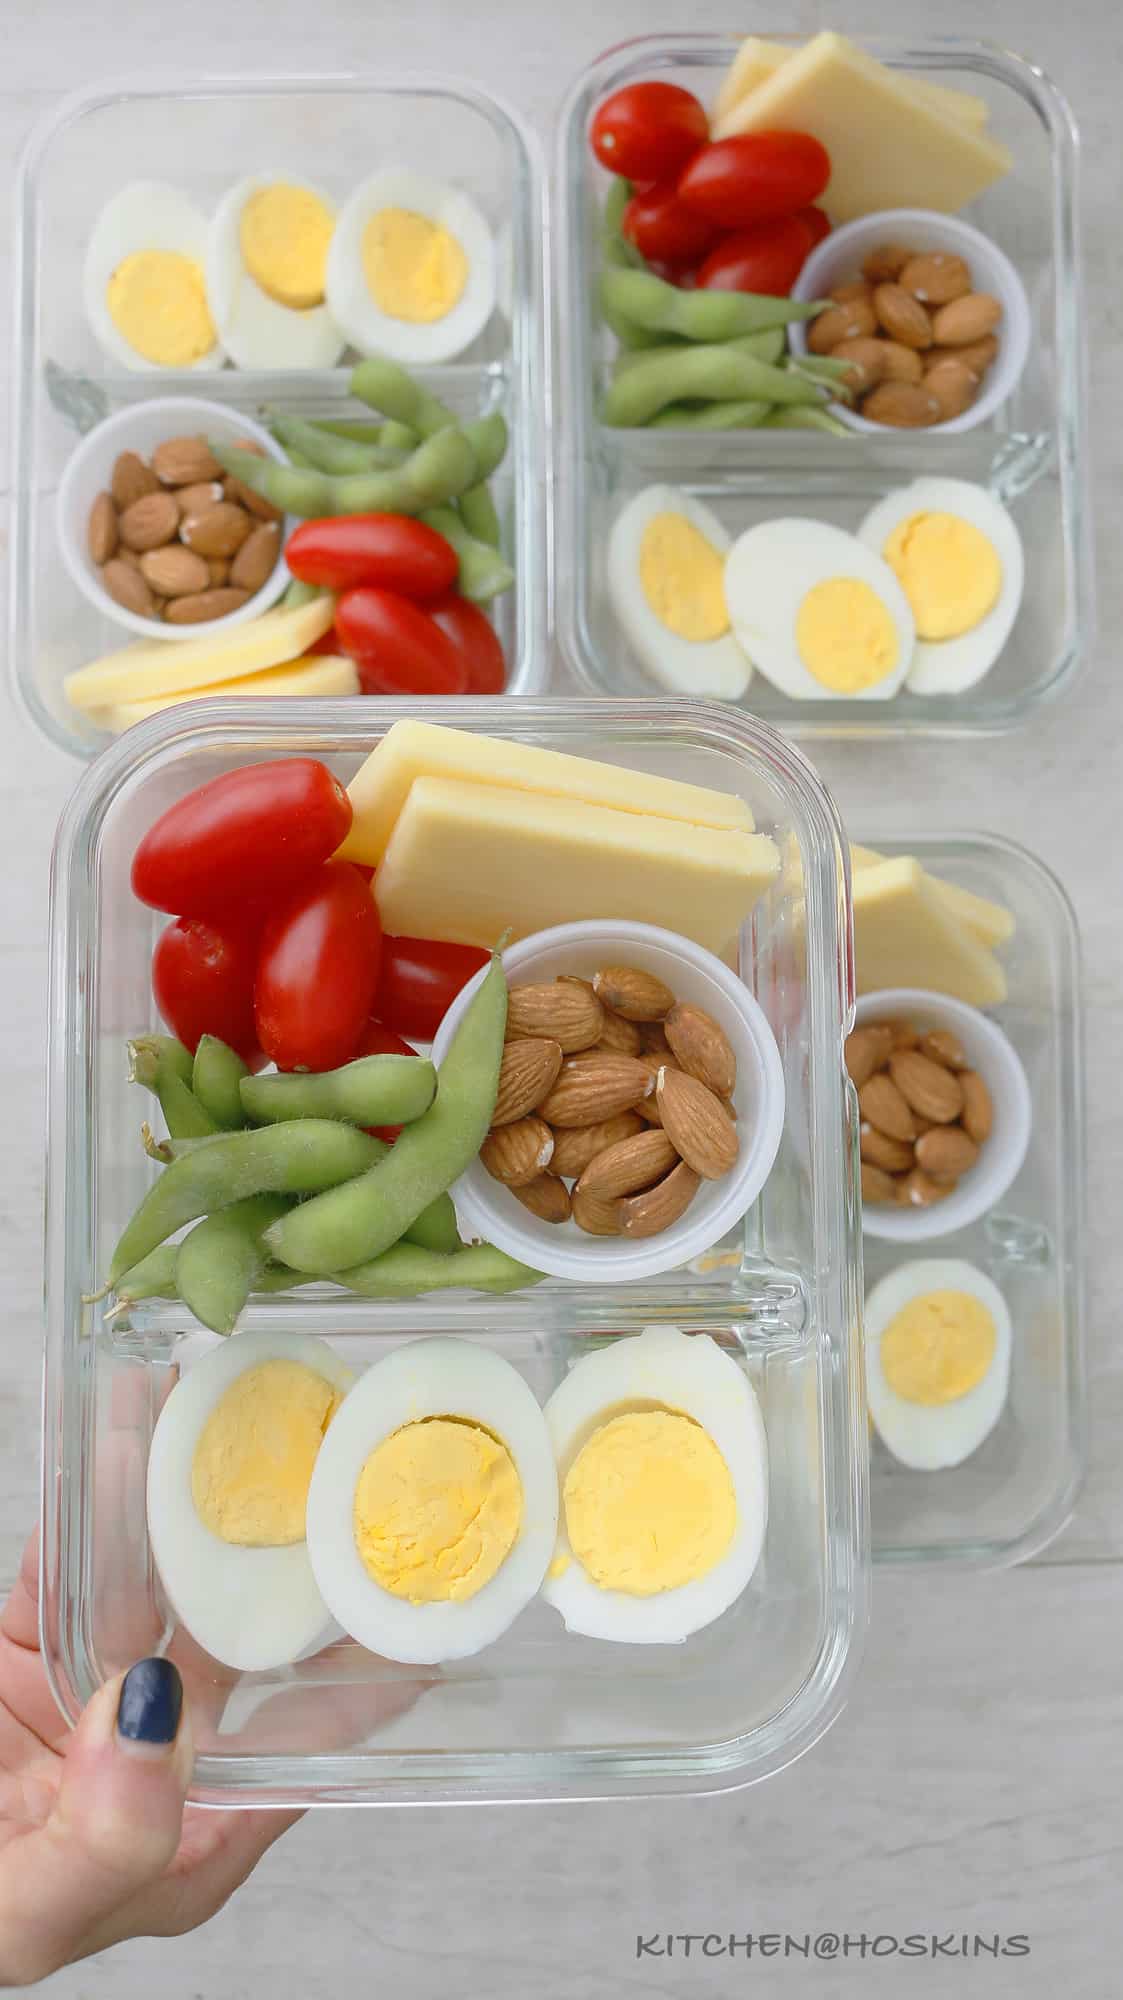 boiled eggs, cheese, almonds, edamame and tomatoes in bento box